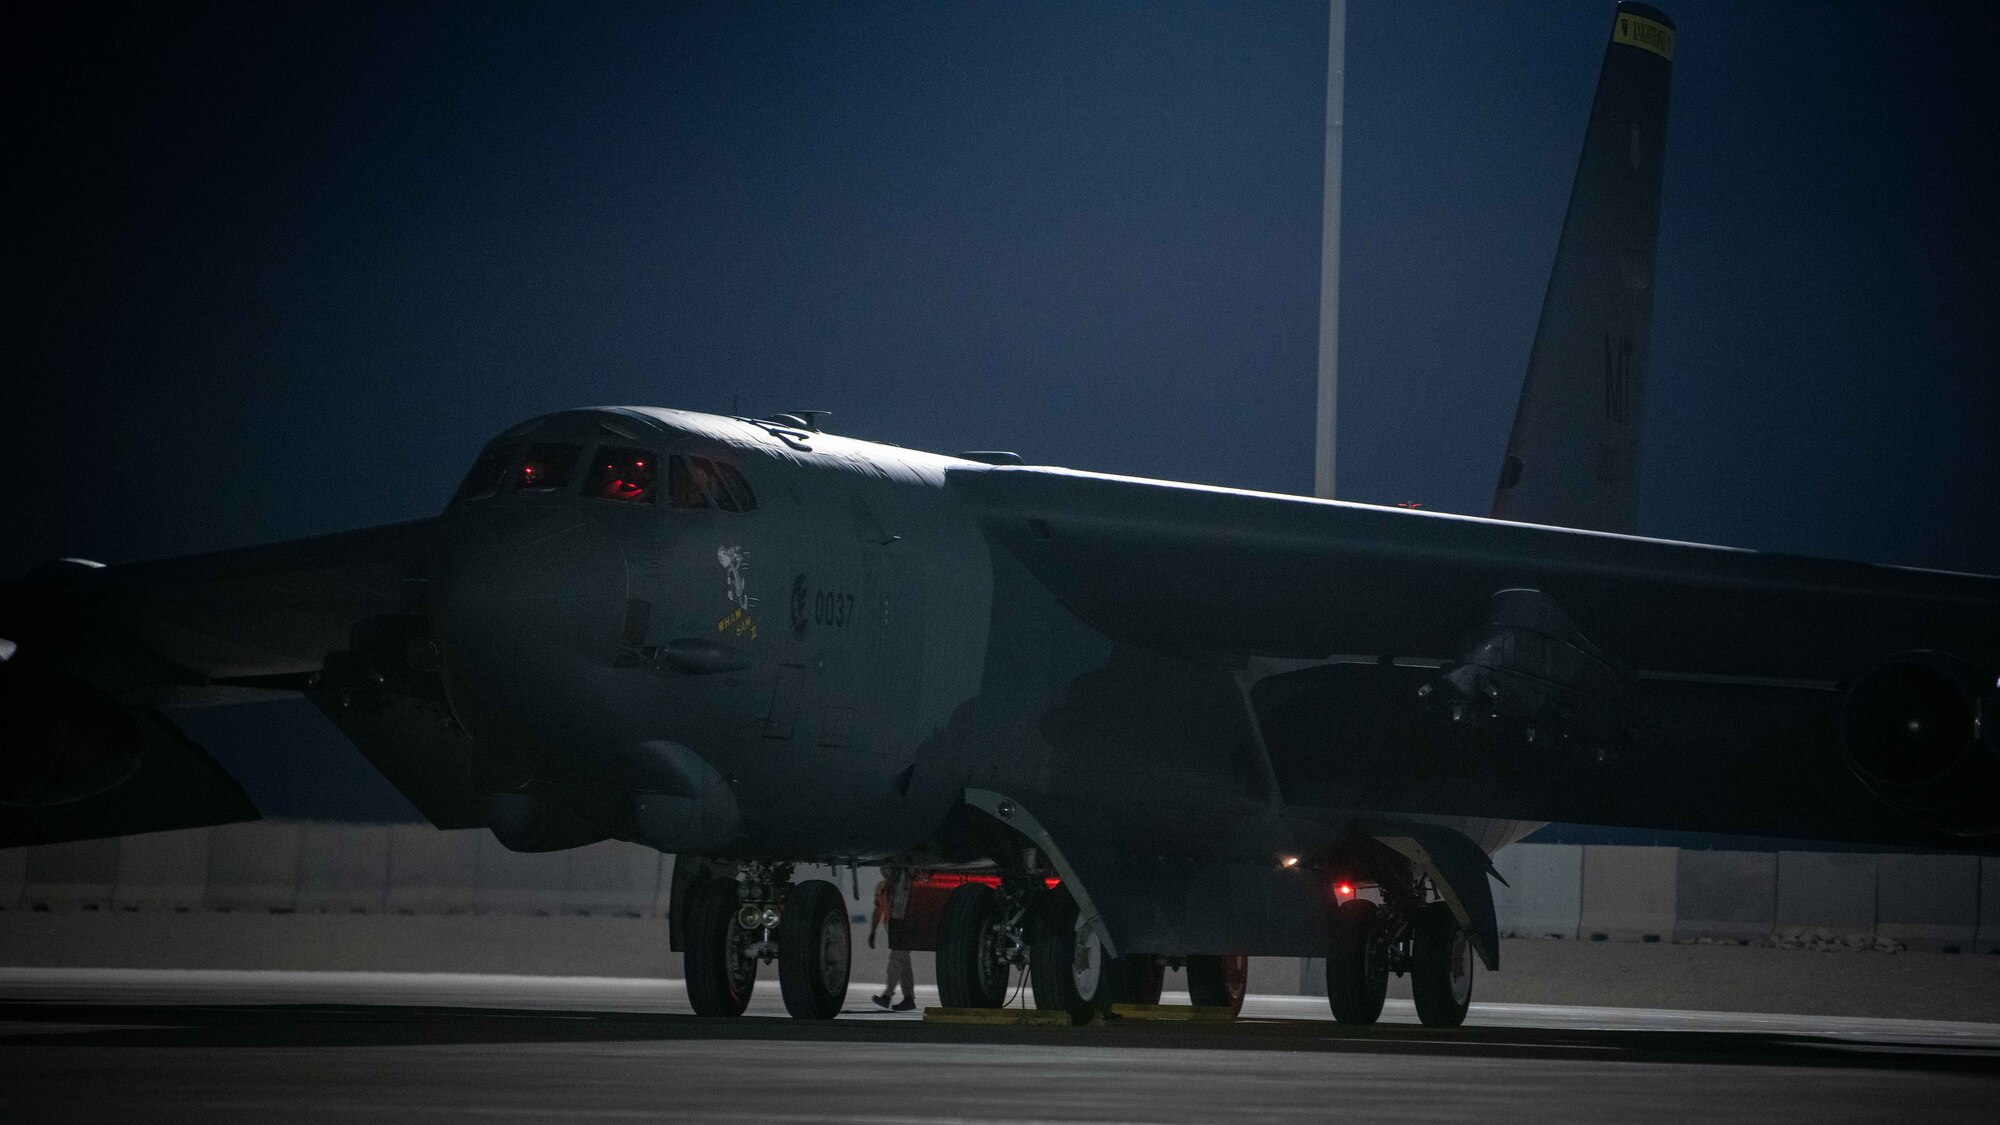 A B-52H Stratofortress assigned to the 5th Bomb Wing, Minot Air Force Base, N.D., parks on the flightline April 23, 2021, at Al Udeid Air Base, Qatar. The B-52 aircraft are deployed to Al Udeid AB to protect U.S. and coalition forces as they conduct drawdown operations from Afghanistan. (U.S. Air Force photo by Staff Sgt. Greg Erwin)